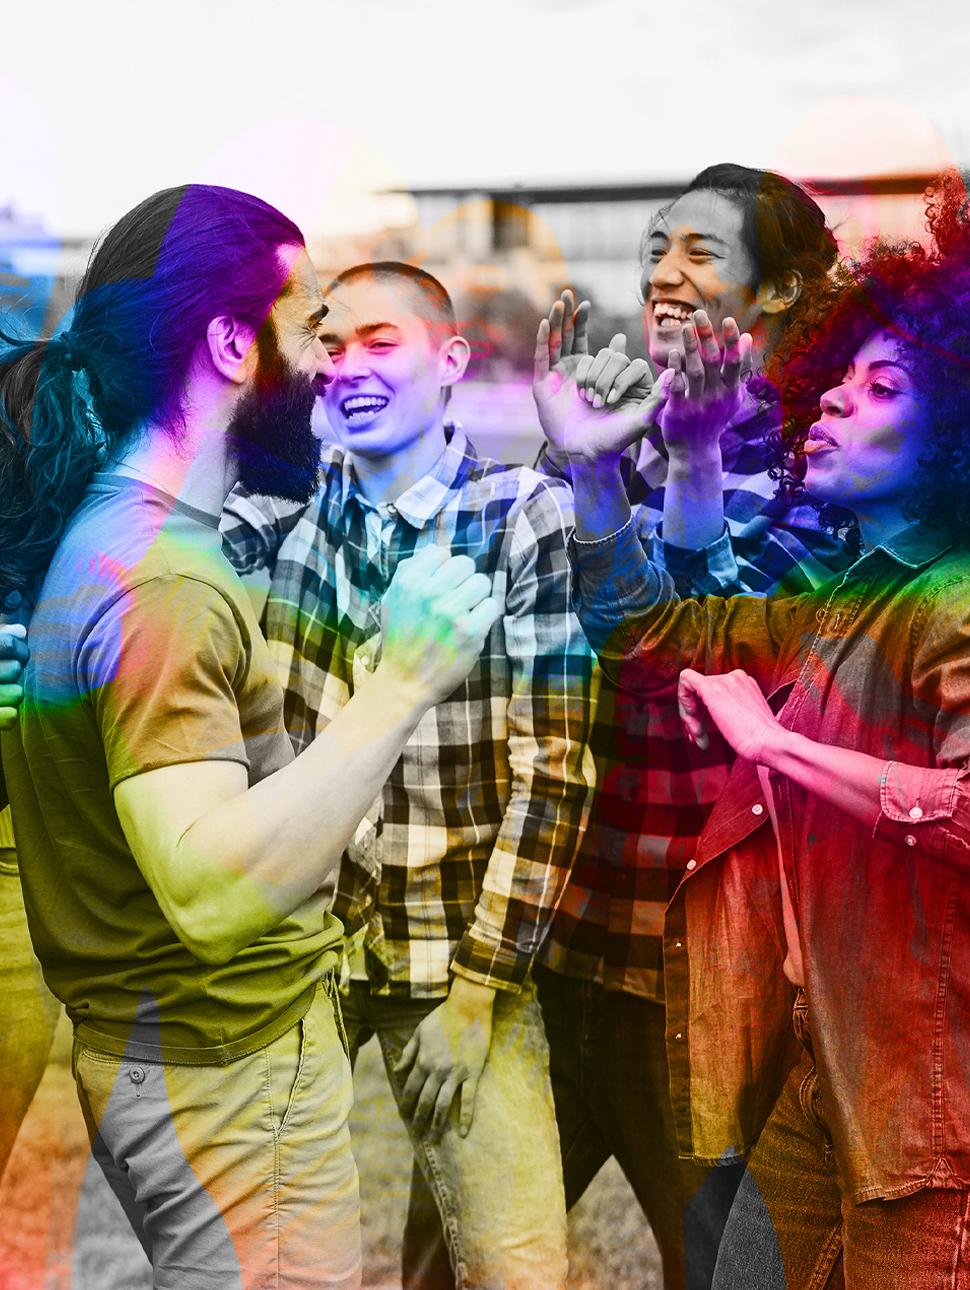 A diverse group of young people having fun dancing outdoors, with a focus on the bearded man's face. The image is black and white but has colourful accents